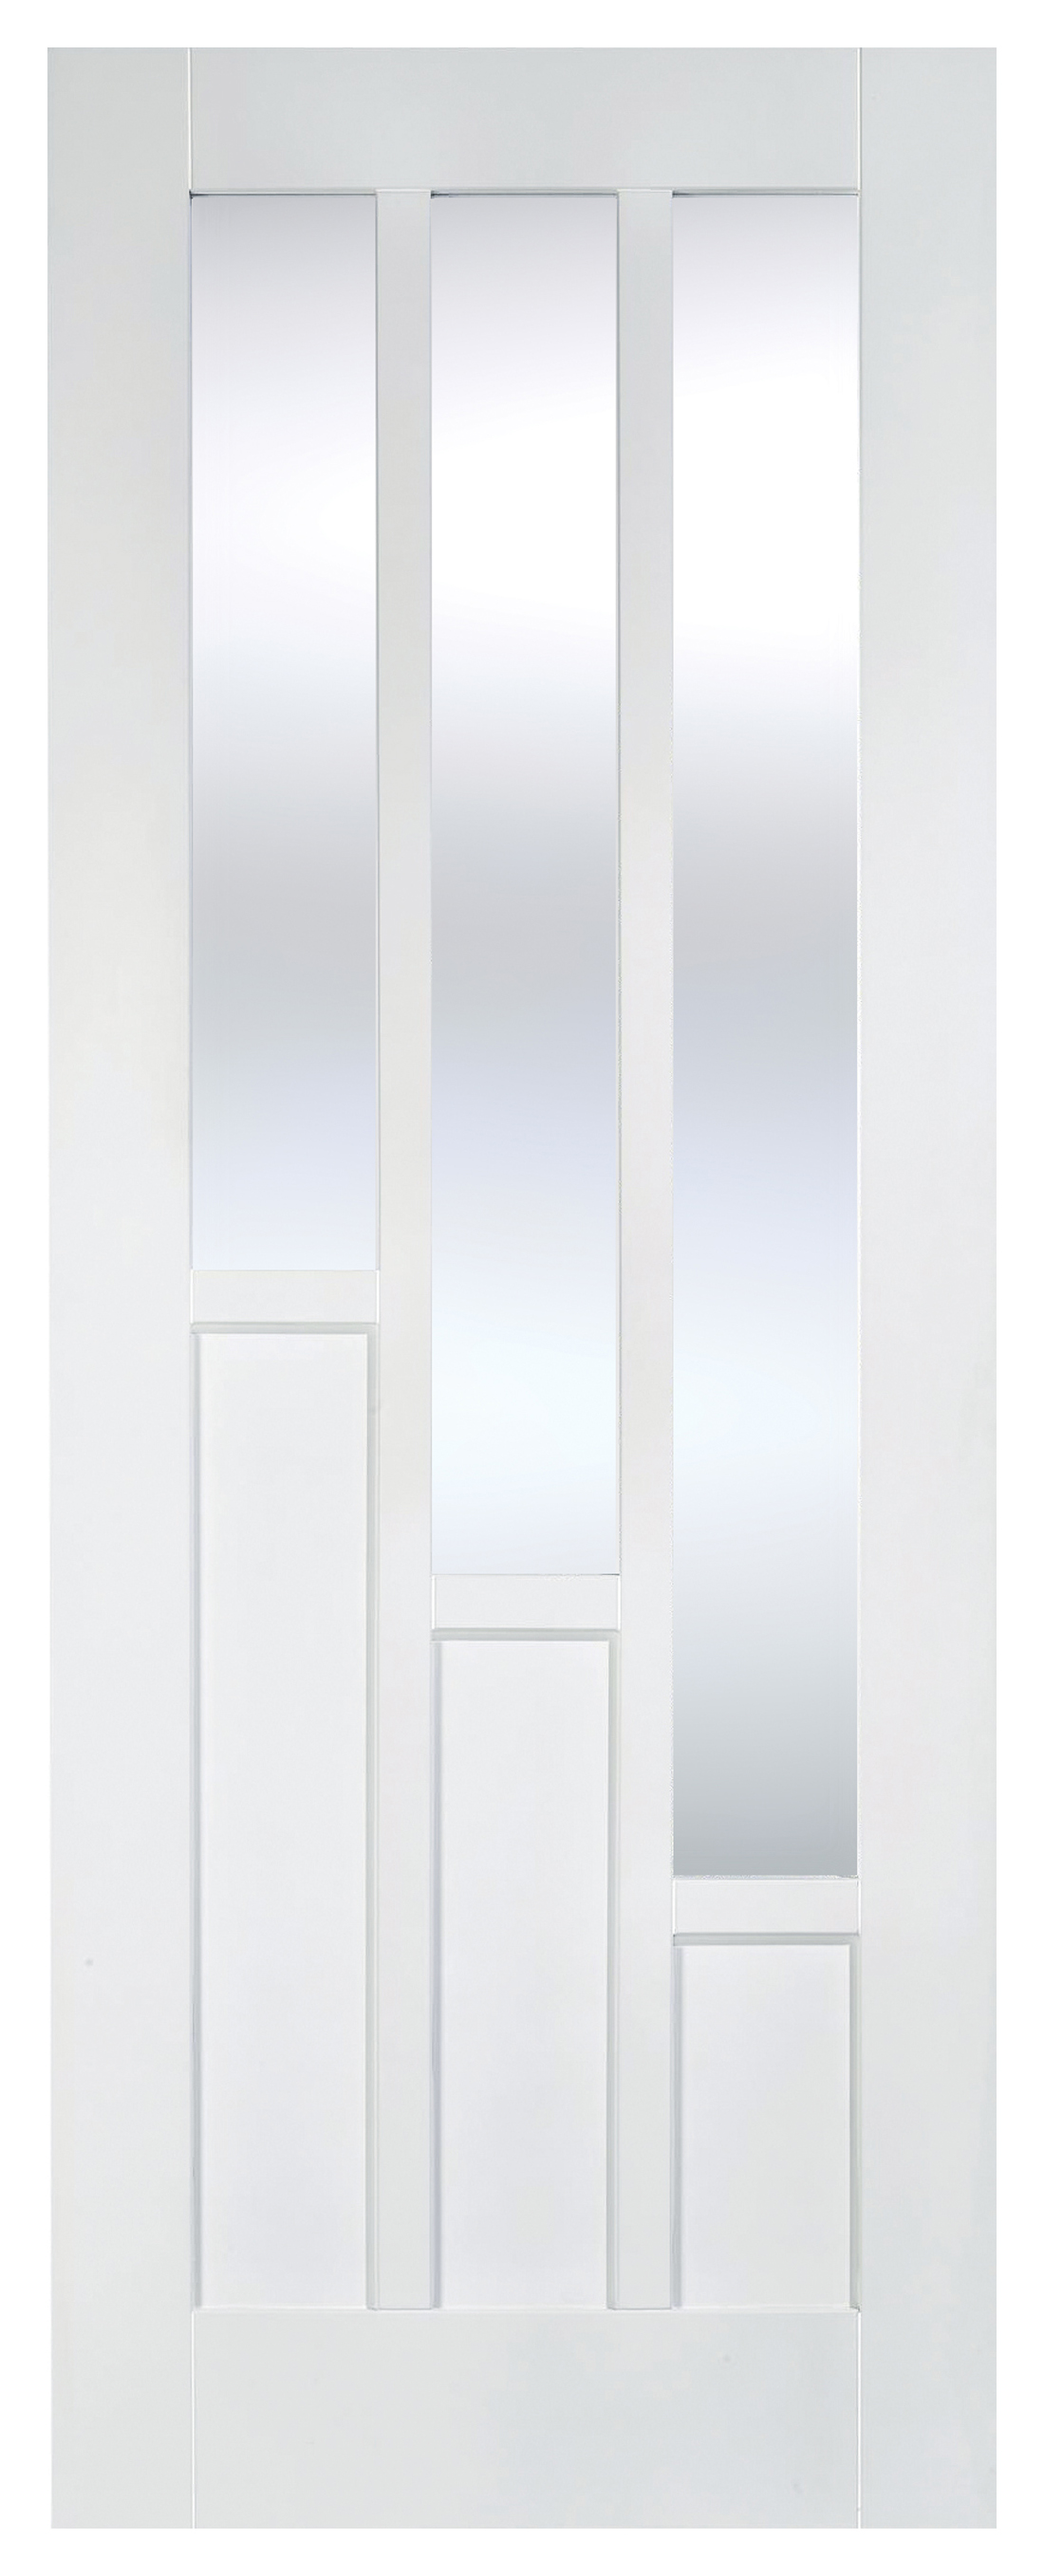 Image of LPD Internal Coventry 3 Lite Primed White Solid Core Door - 762 x 1981mm